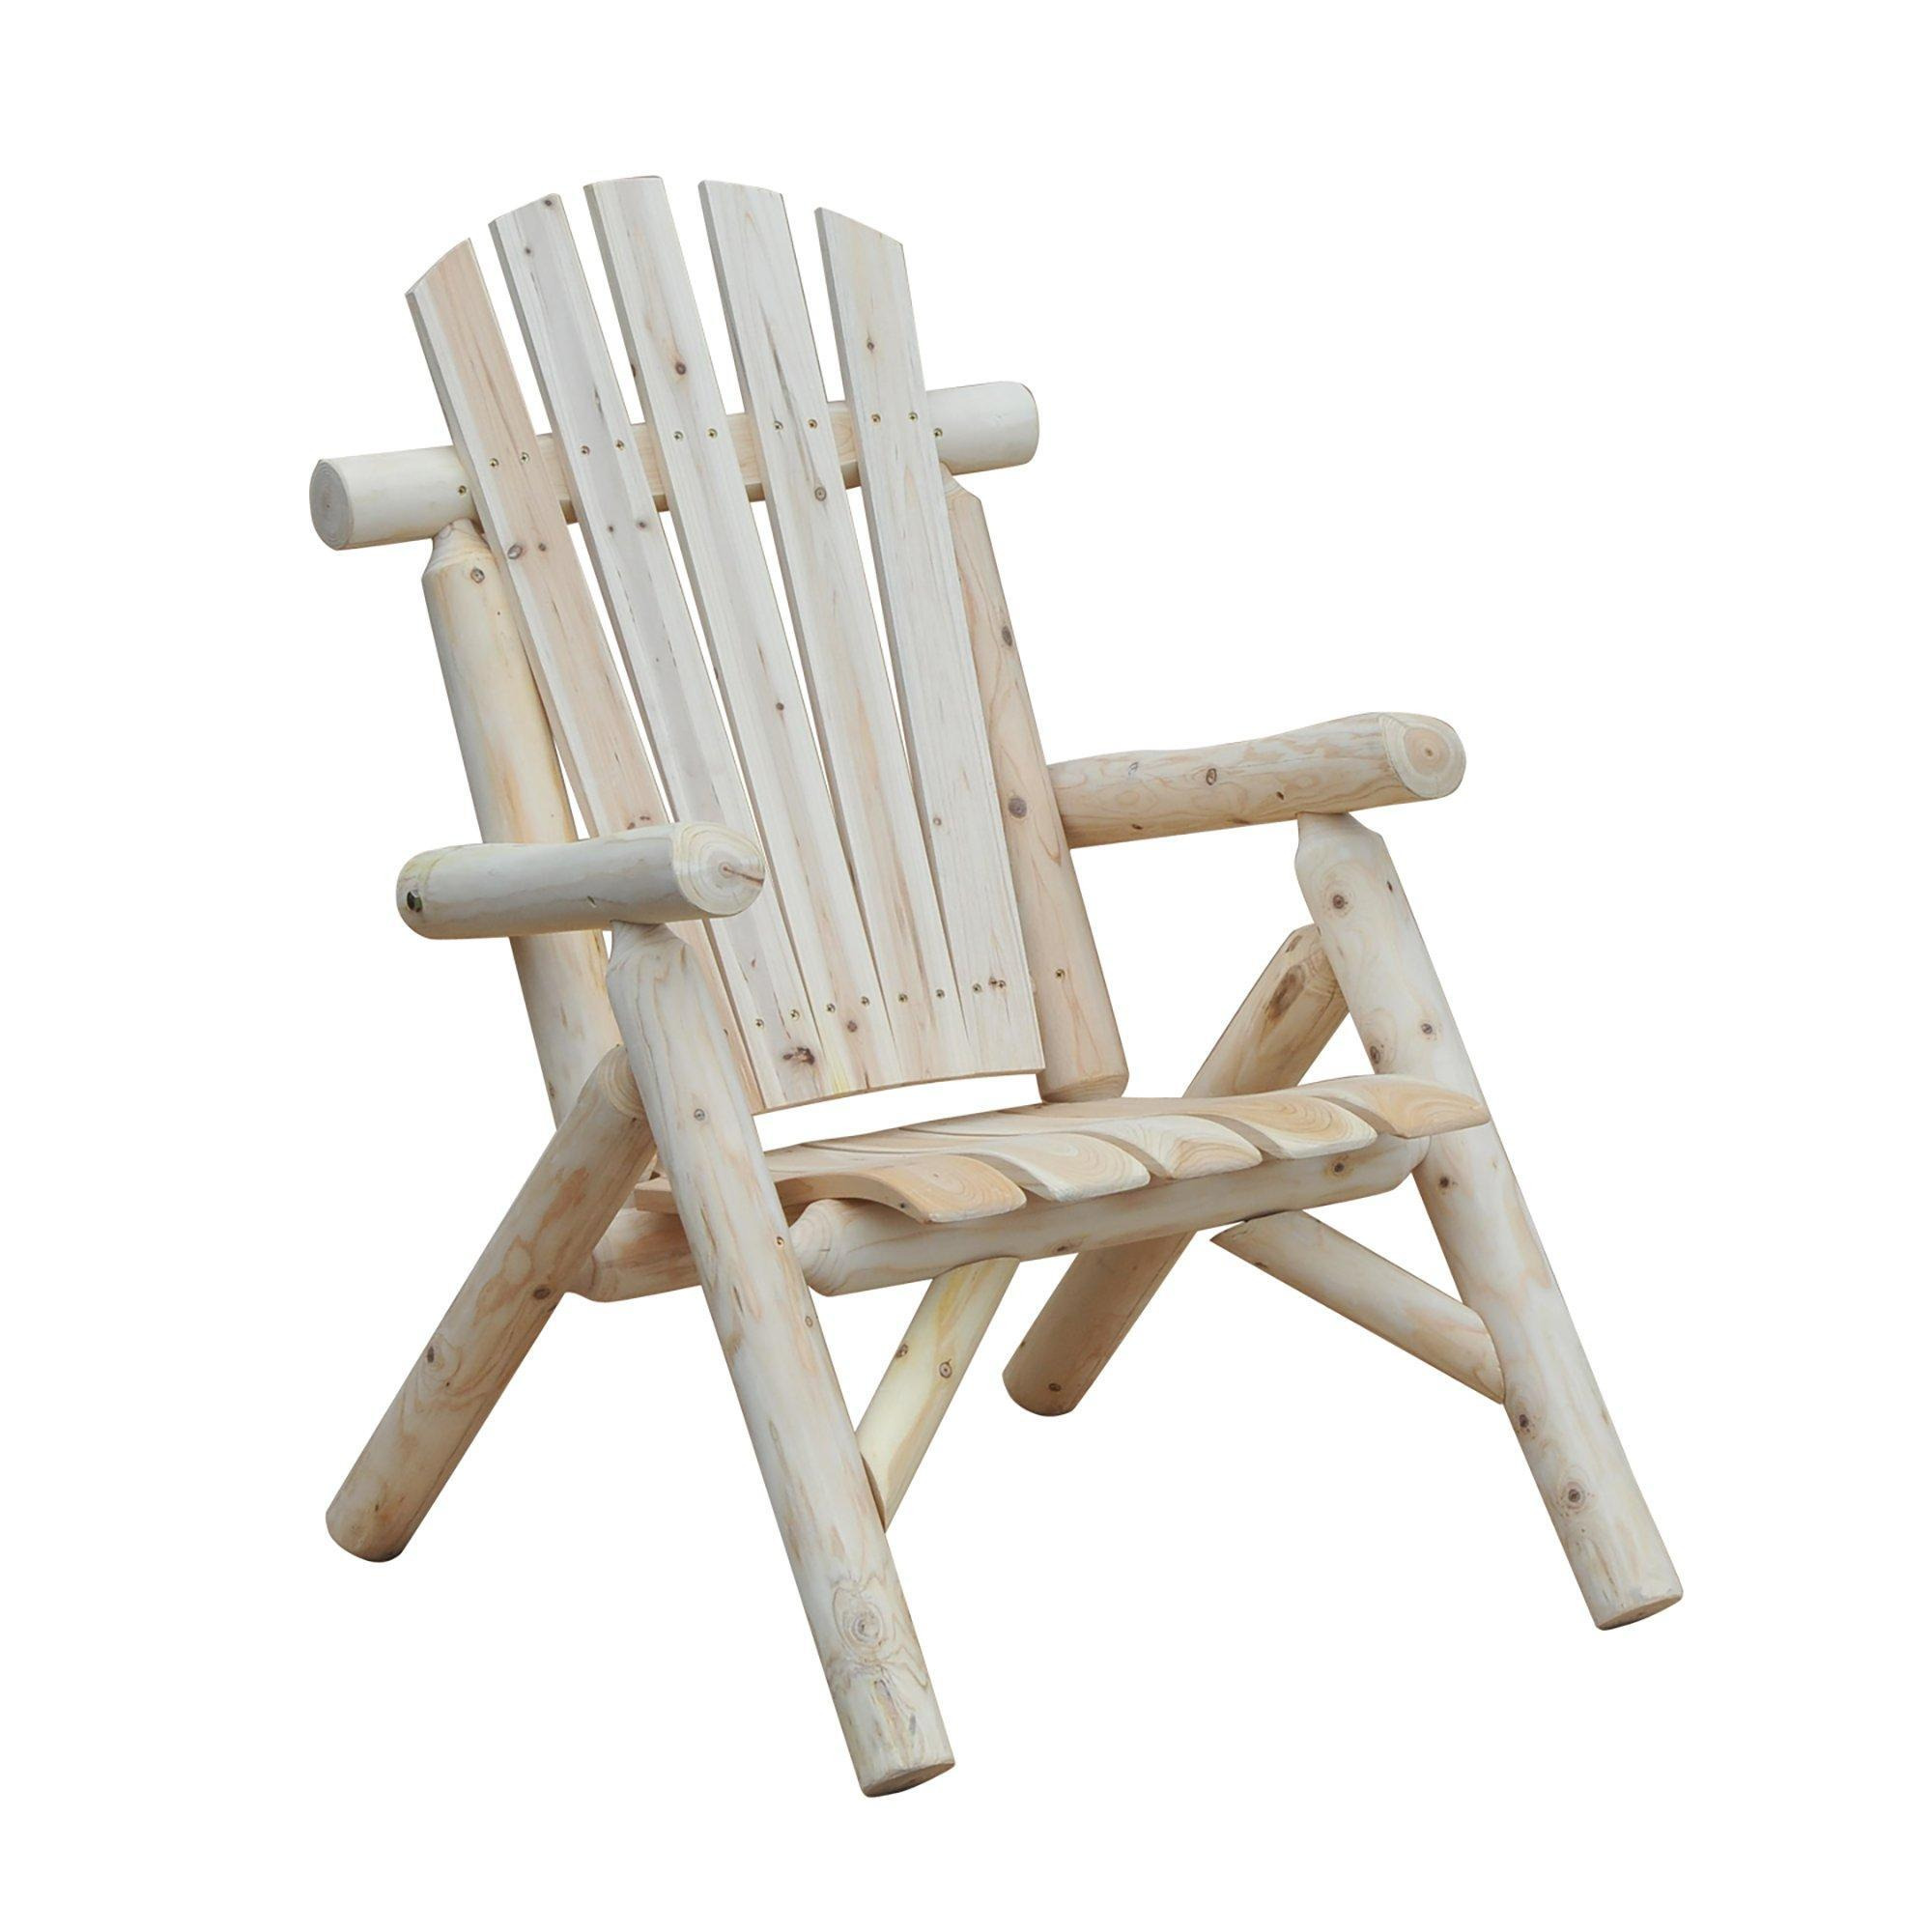 Outdoor Wood Adirondack Chair Patio Chaise Lounge Deck Reclined Bench - image 1